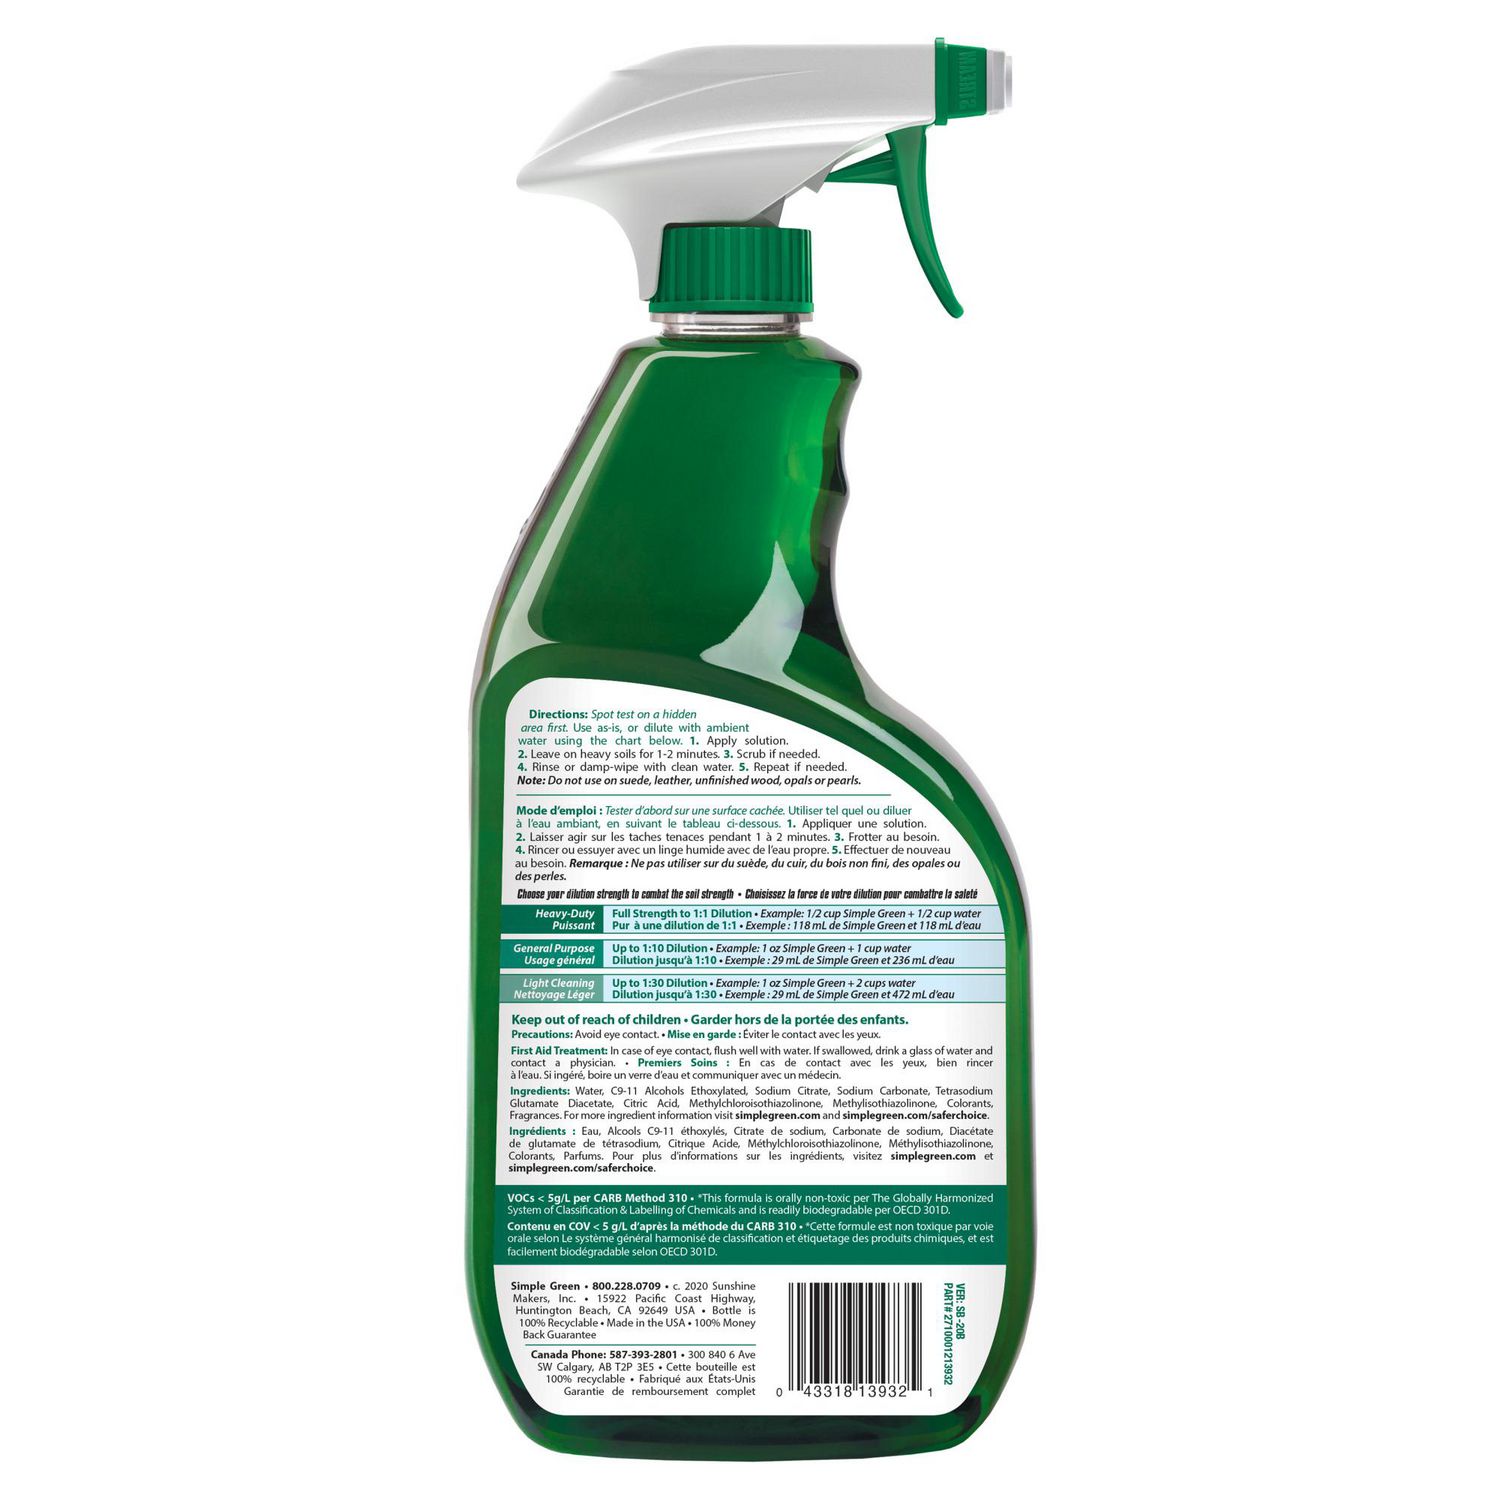 Simple Green all purpose Cleaner nettoyant tout-usage. General green